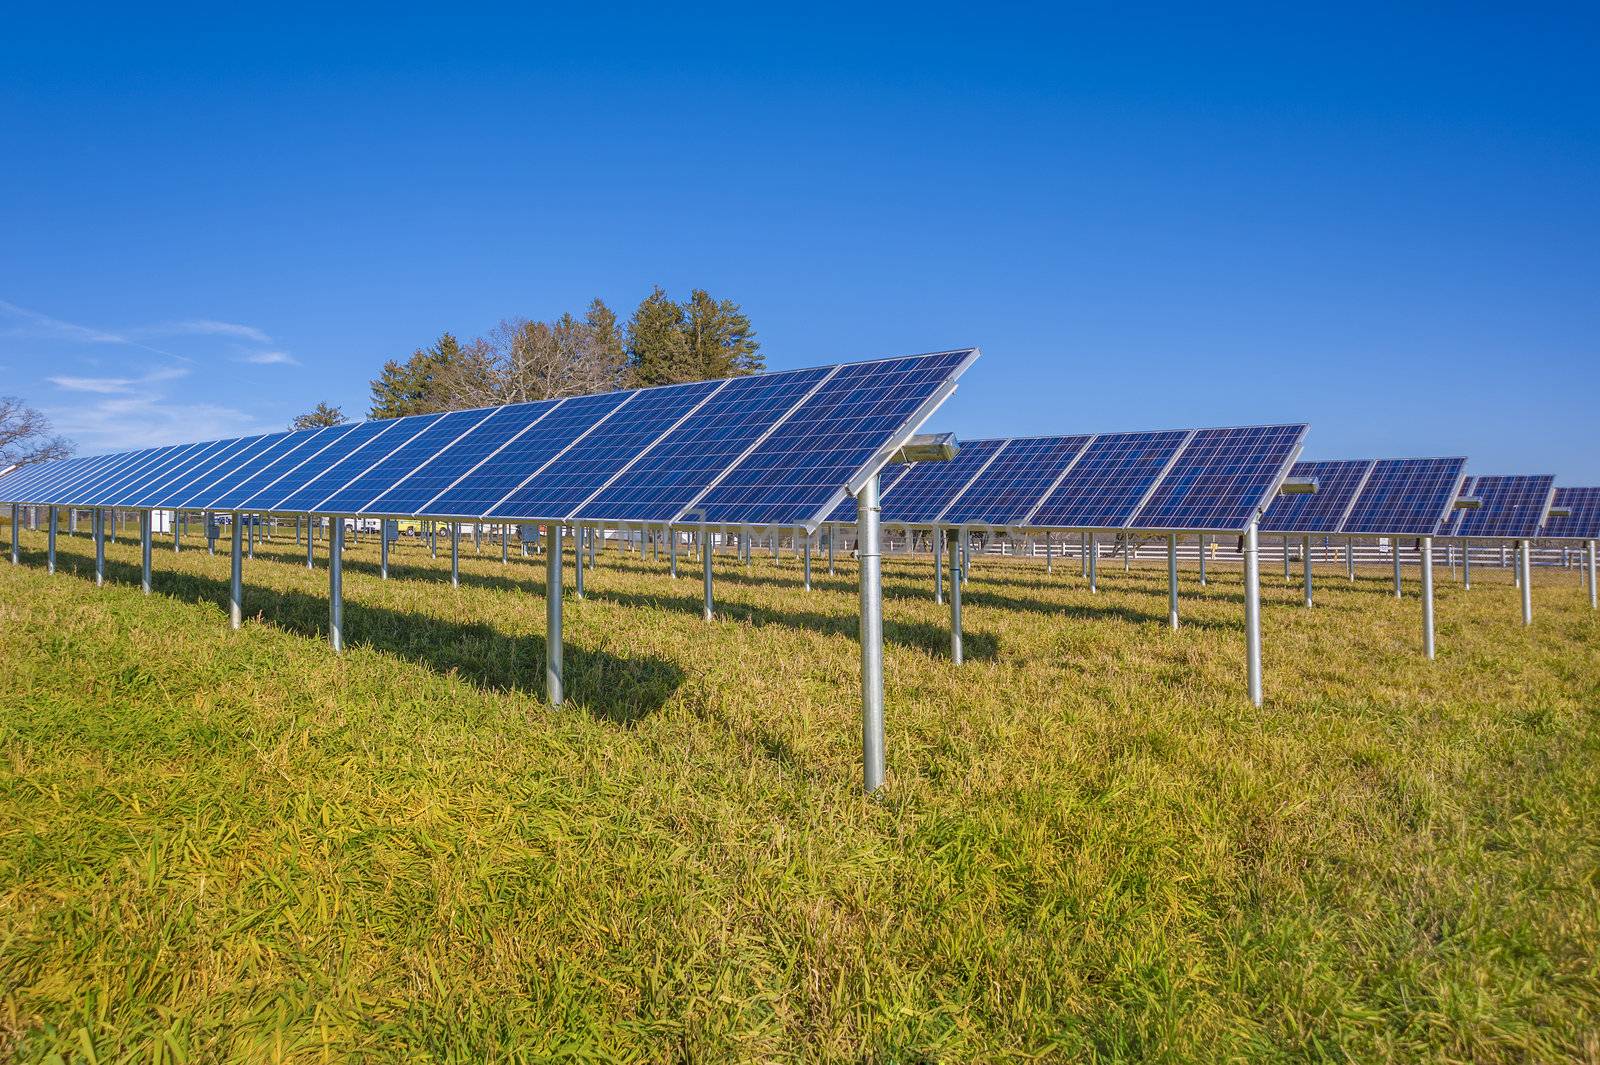 Solar panels in field with blue sky